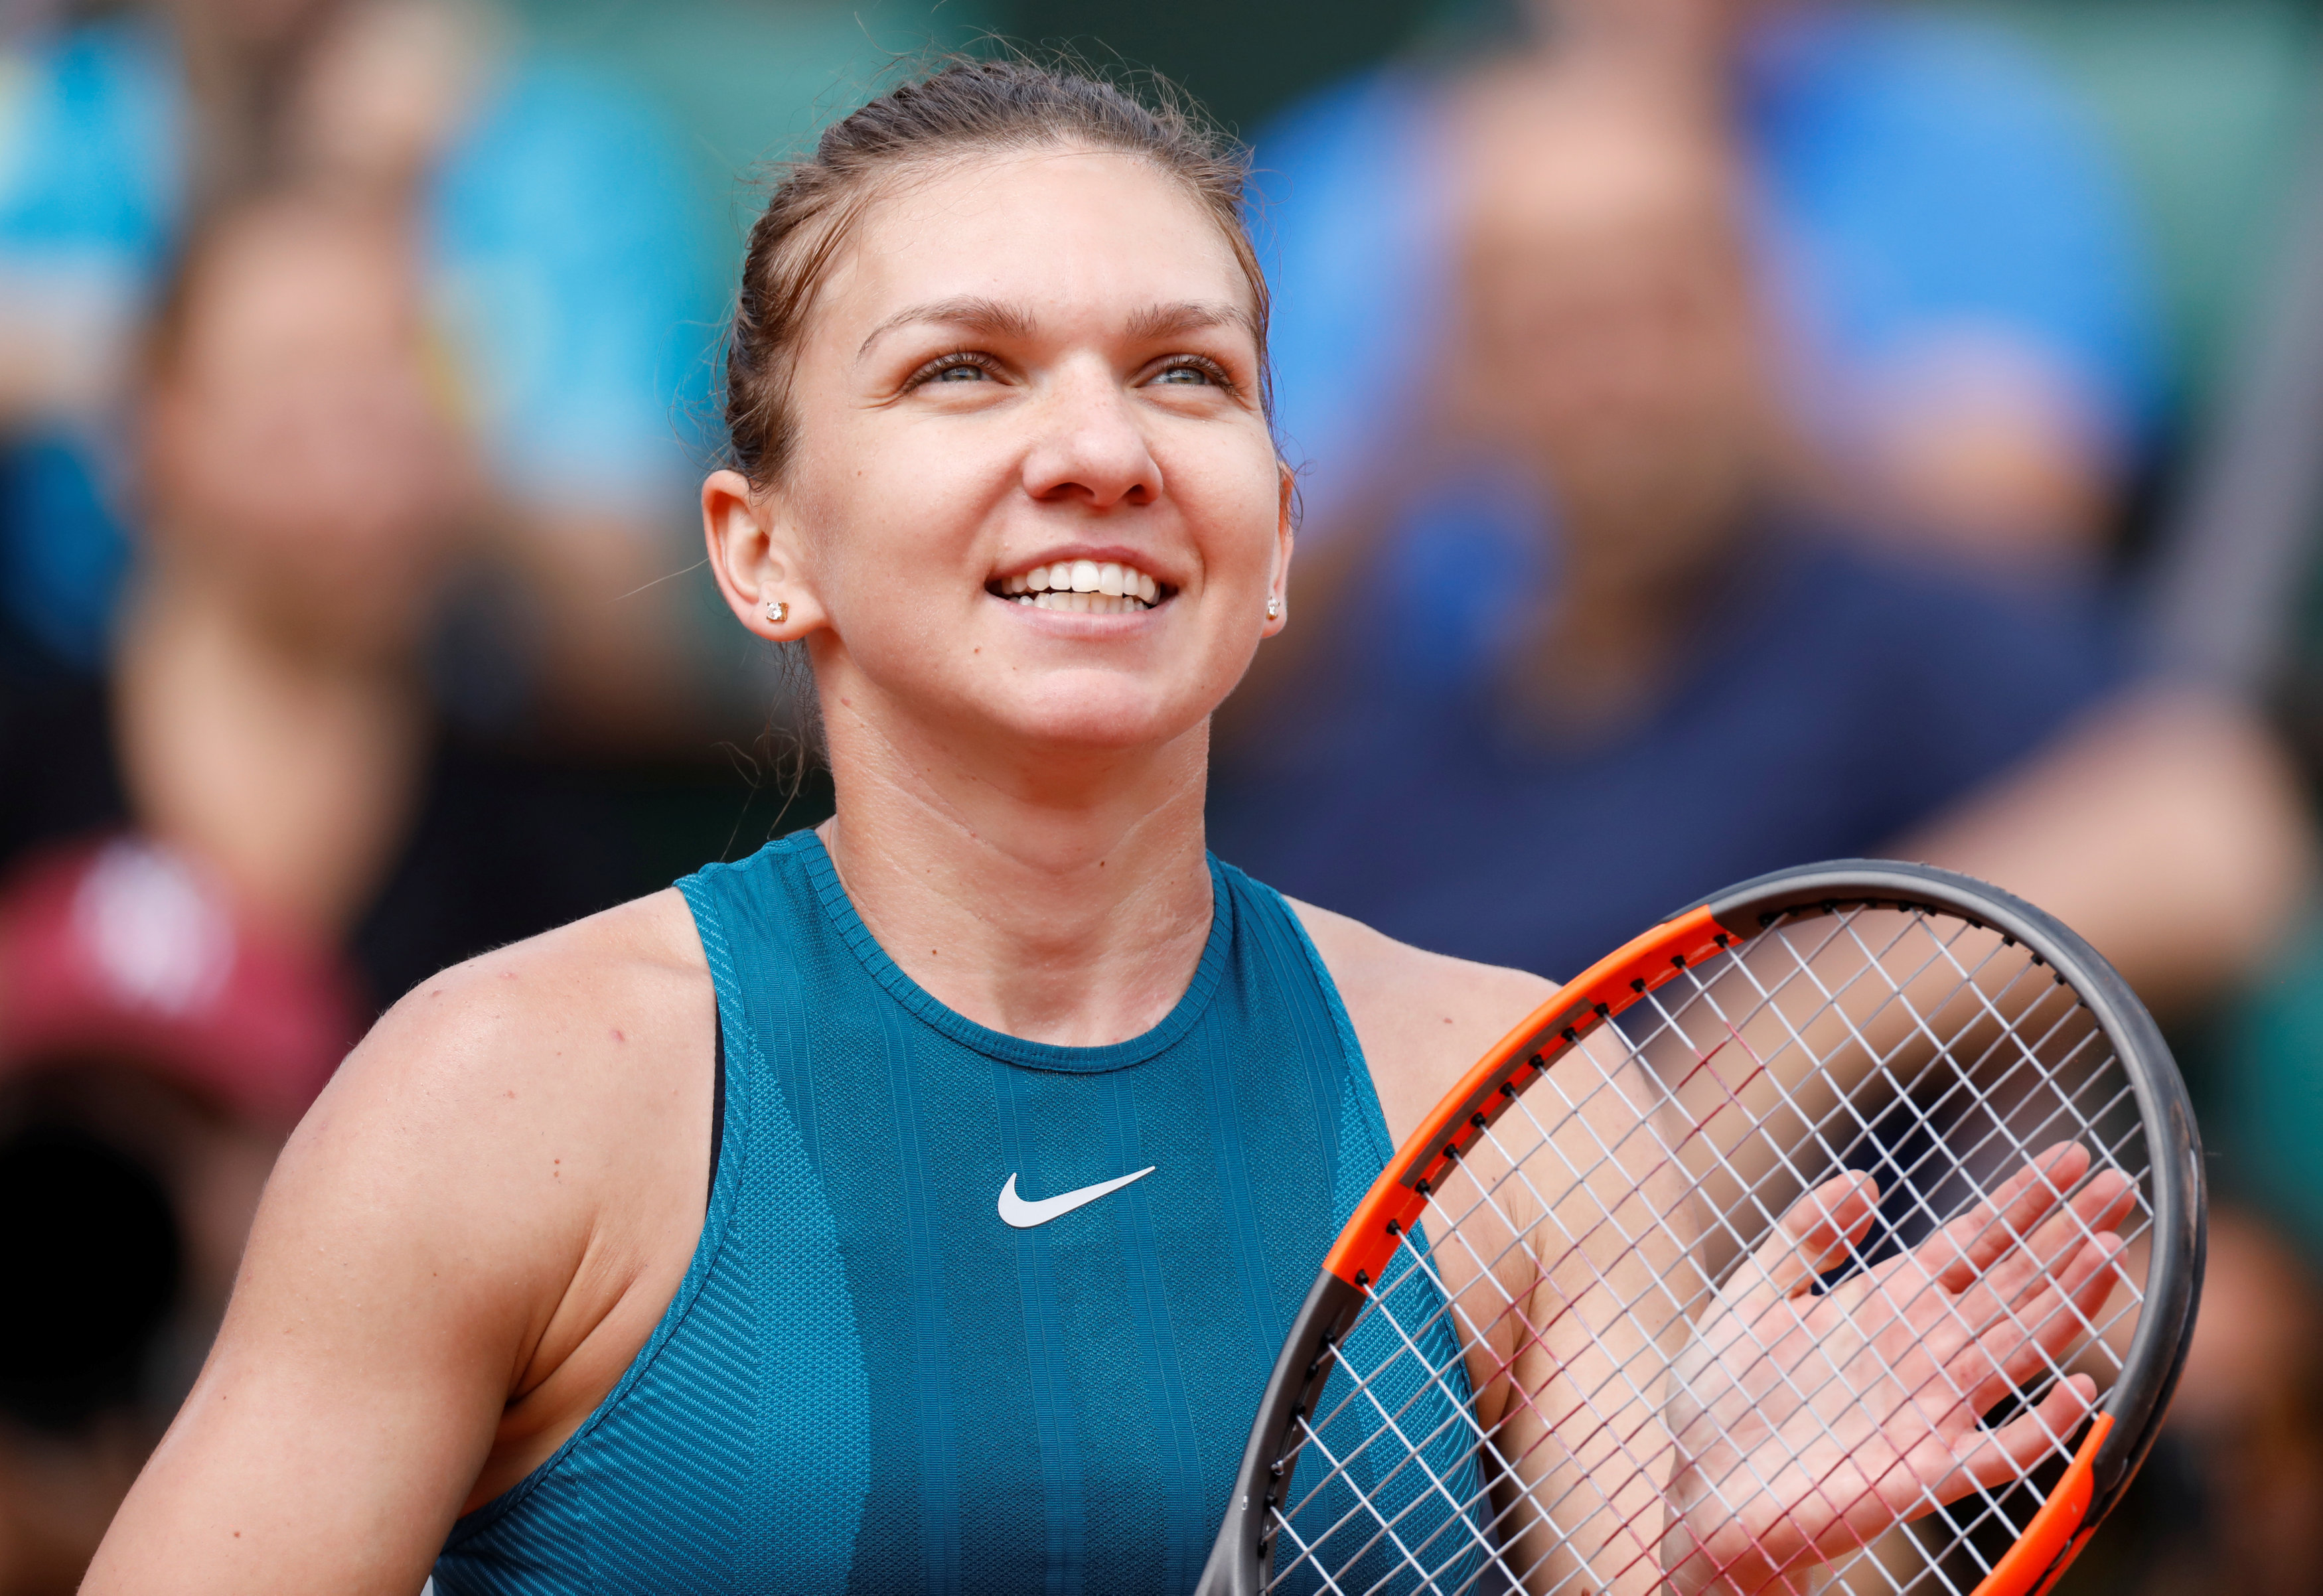 French Open: Halep humbles Mertens to enter quarterfinals